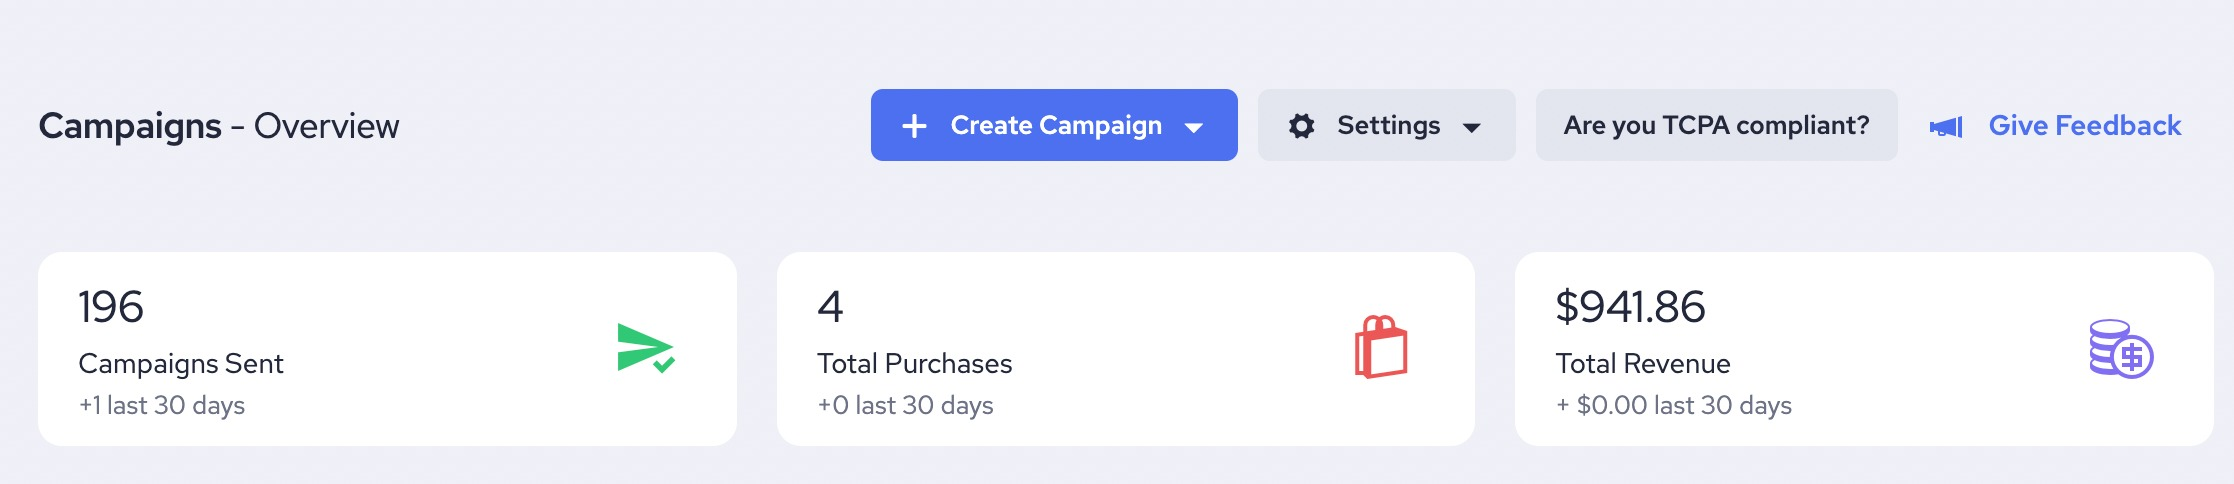 If you have a Mindbody account integrated with Referrizer, you now have access to the Campaign Revenue dashboard which has been added to the Campaigns listing page.